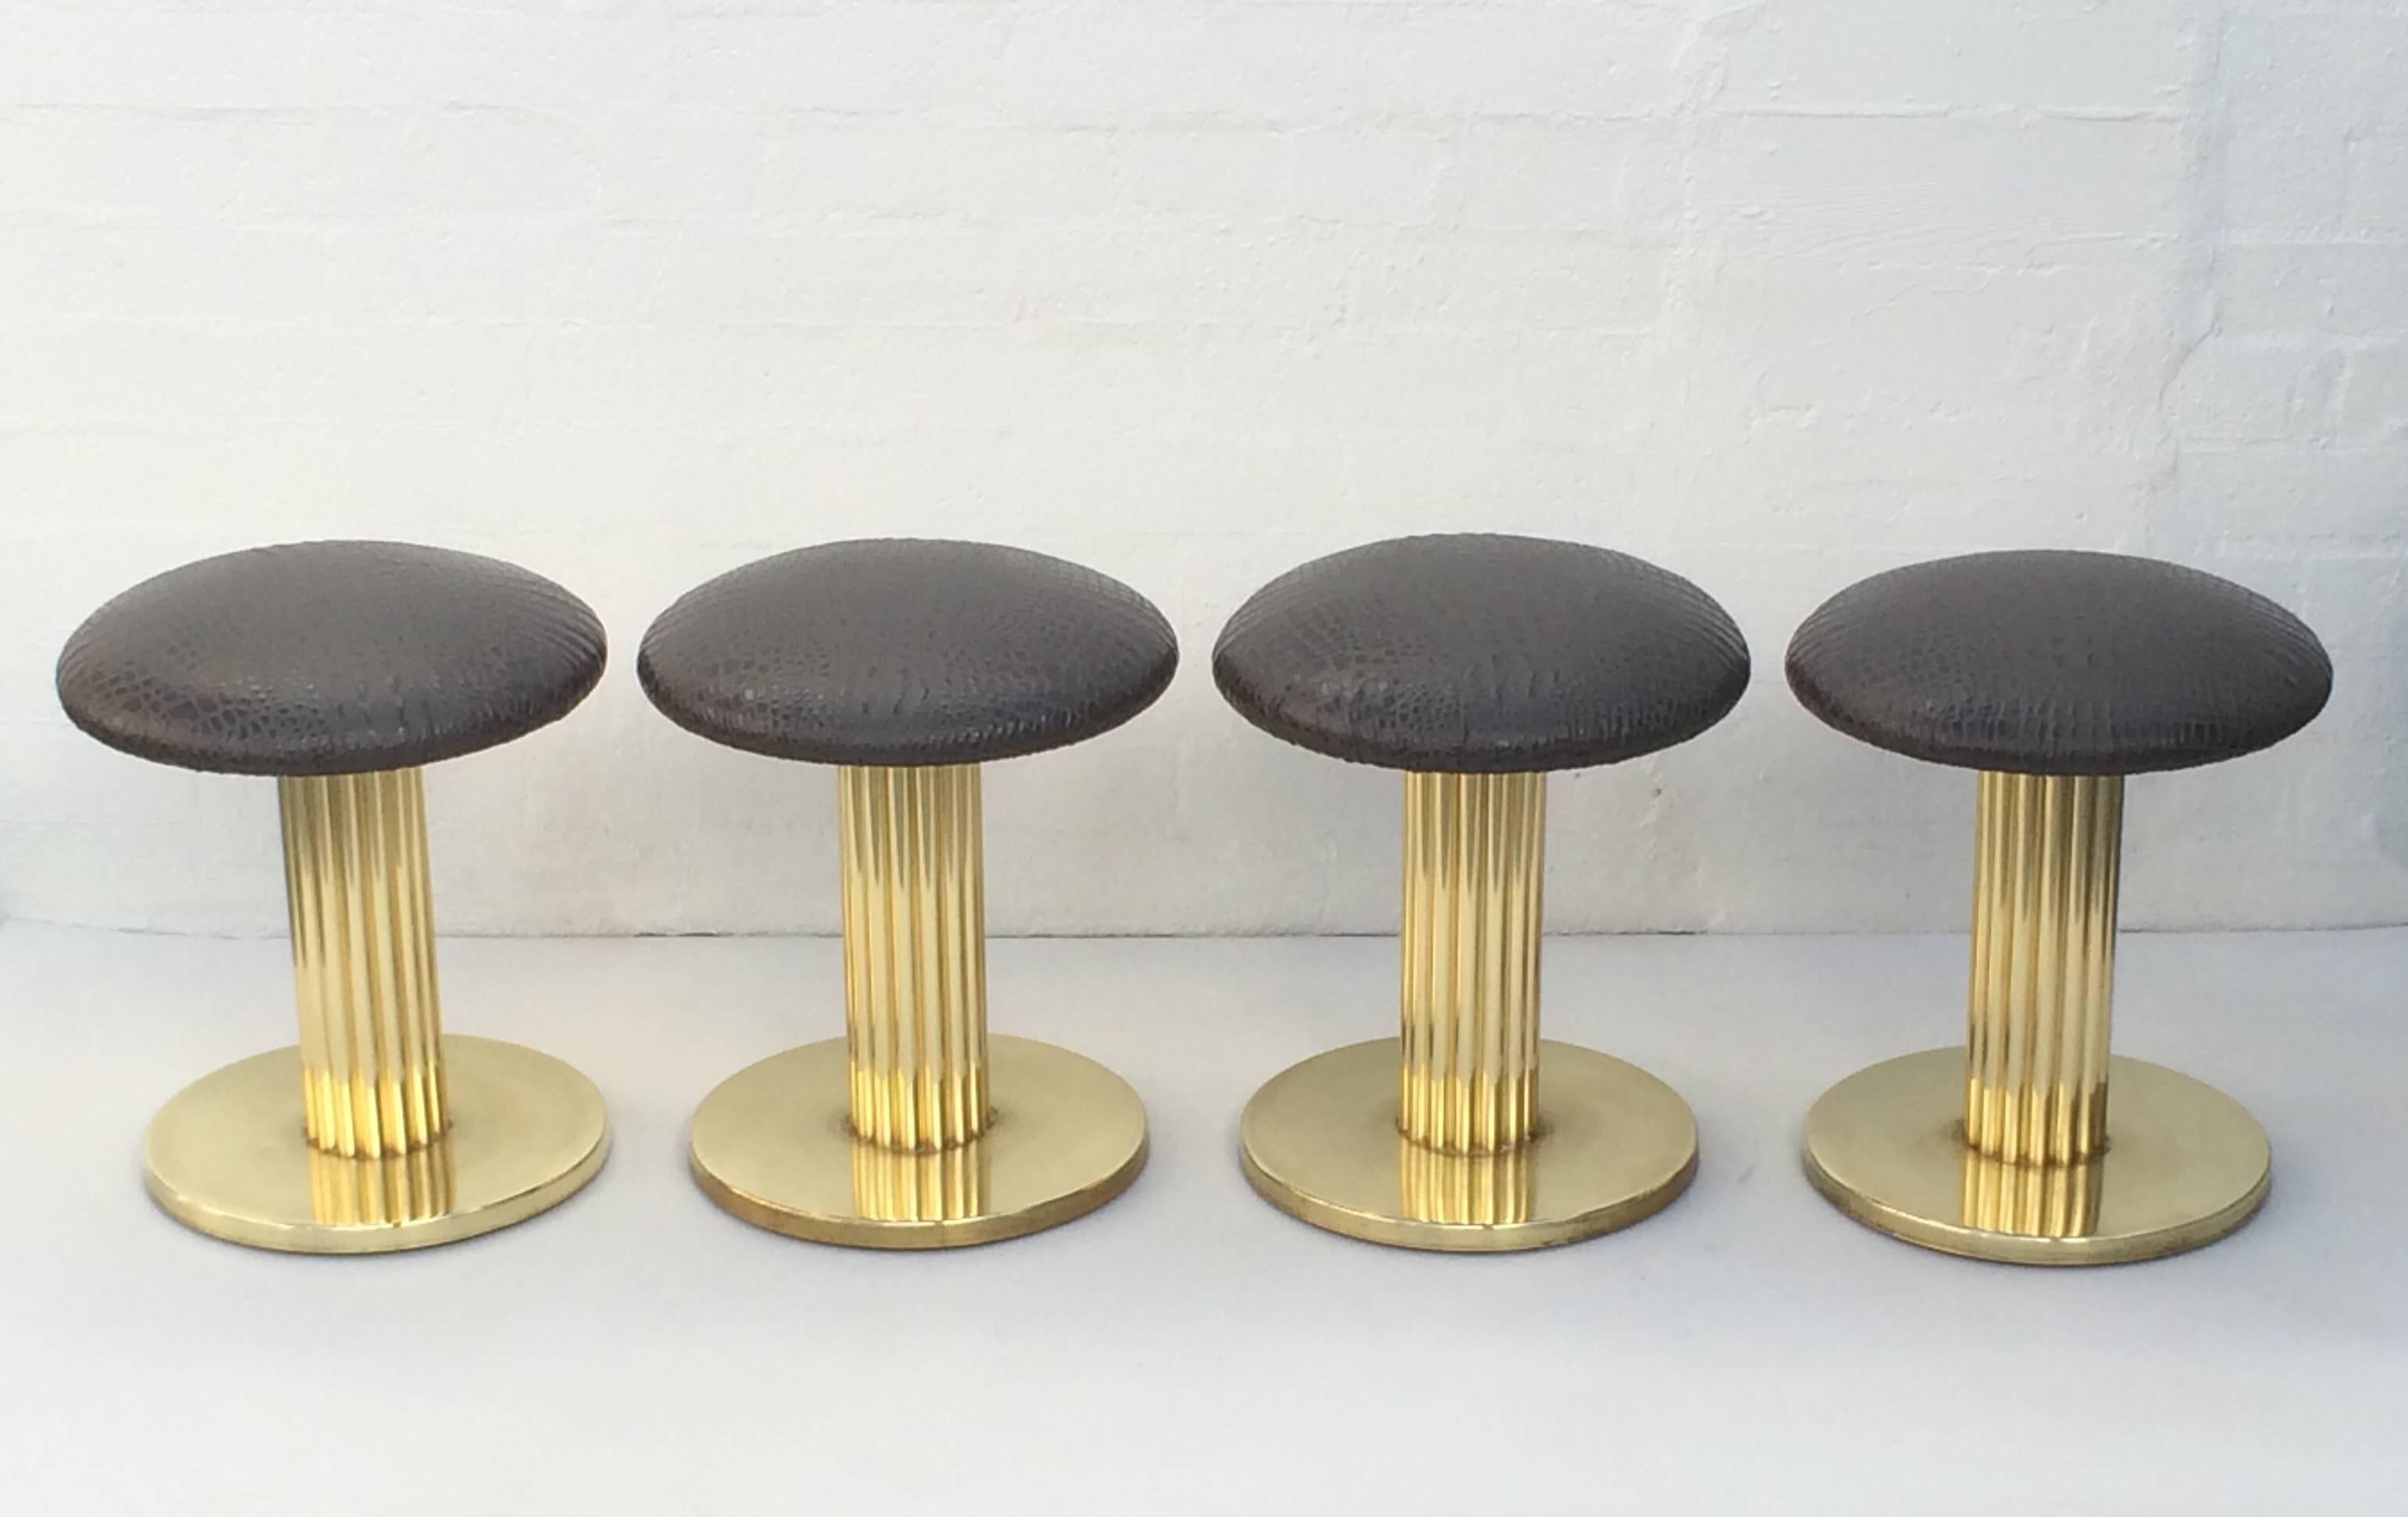 American Brass and Leather Swivel Stools by Design for Leisure Ltd